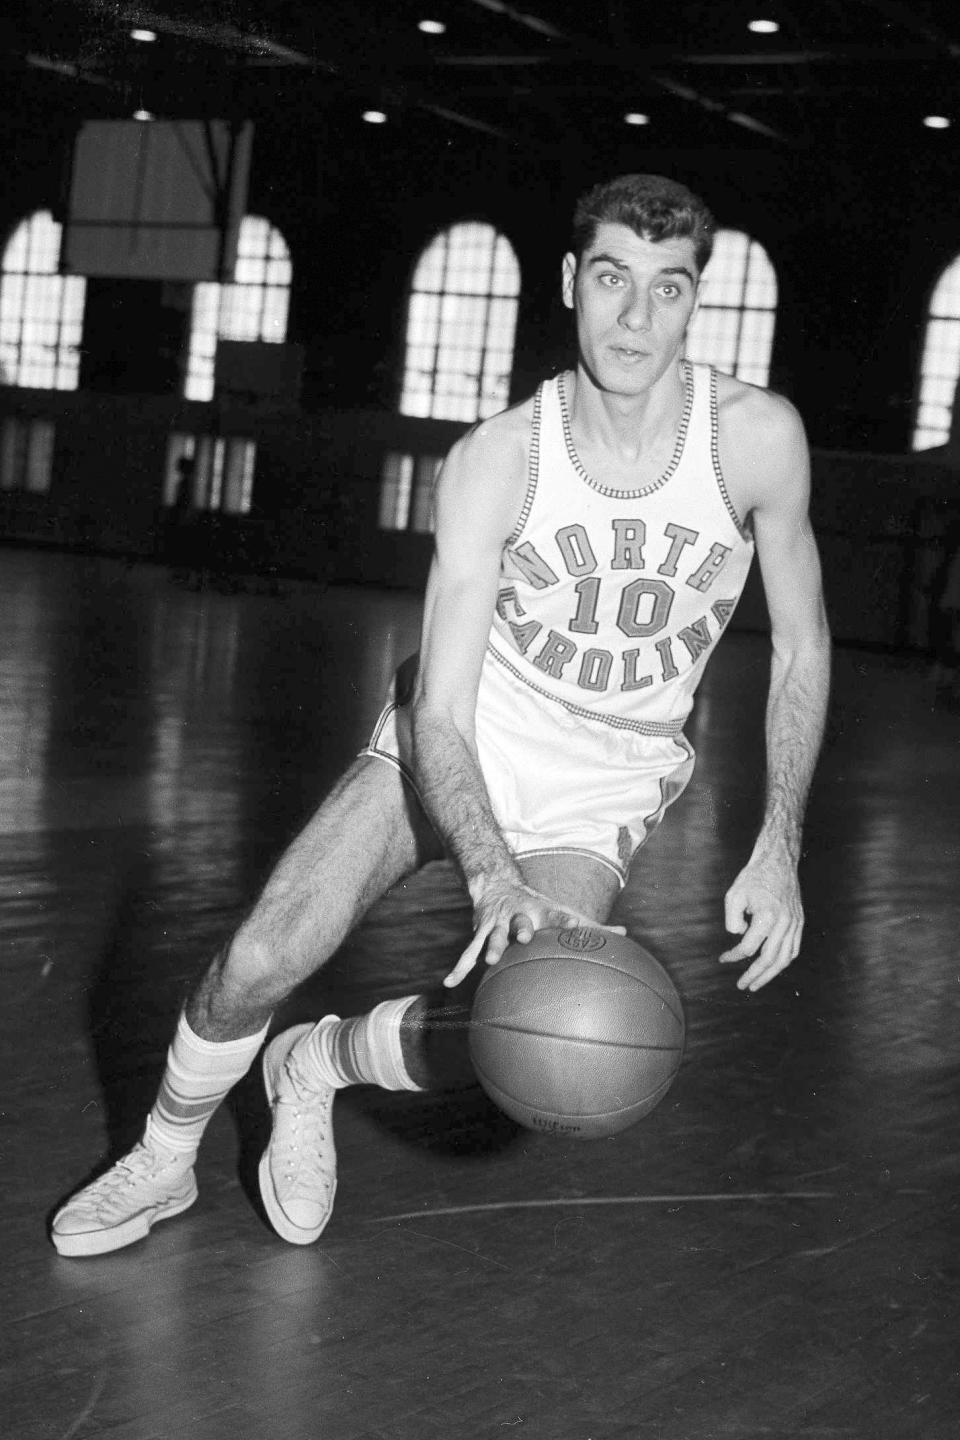 FILE - North Carolina basketball star Lennie Rosenbluth is shown during a practice session Feb. 27, 1957, location not known. Rosenbluth, who led North Carolina to its first basketball NCAA title in 1957 with a victory over Wilt Chamberlain and Kansas in the championship game, died Saturday, June 18, 2022. He was 89. (AP Photo/File)